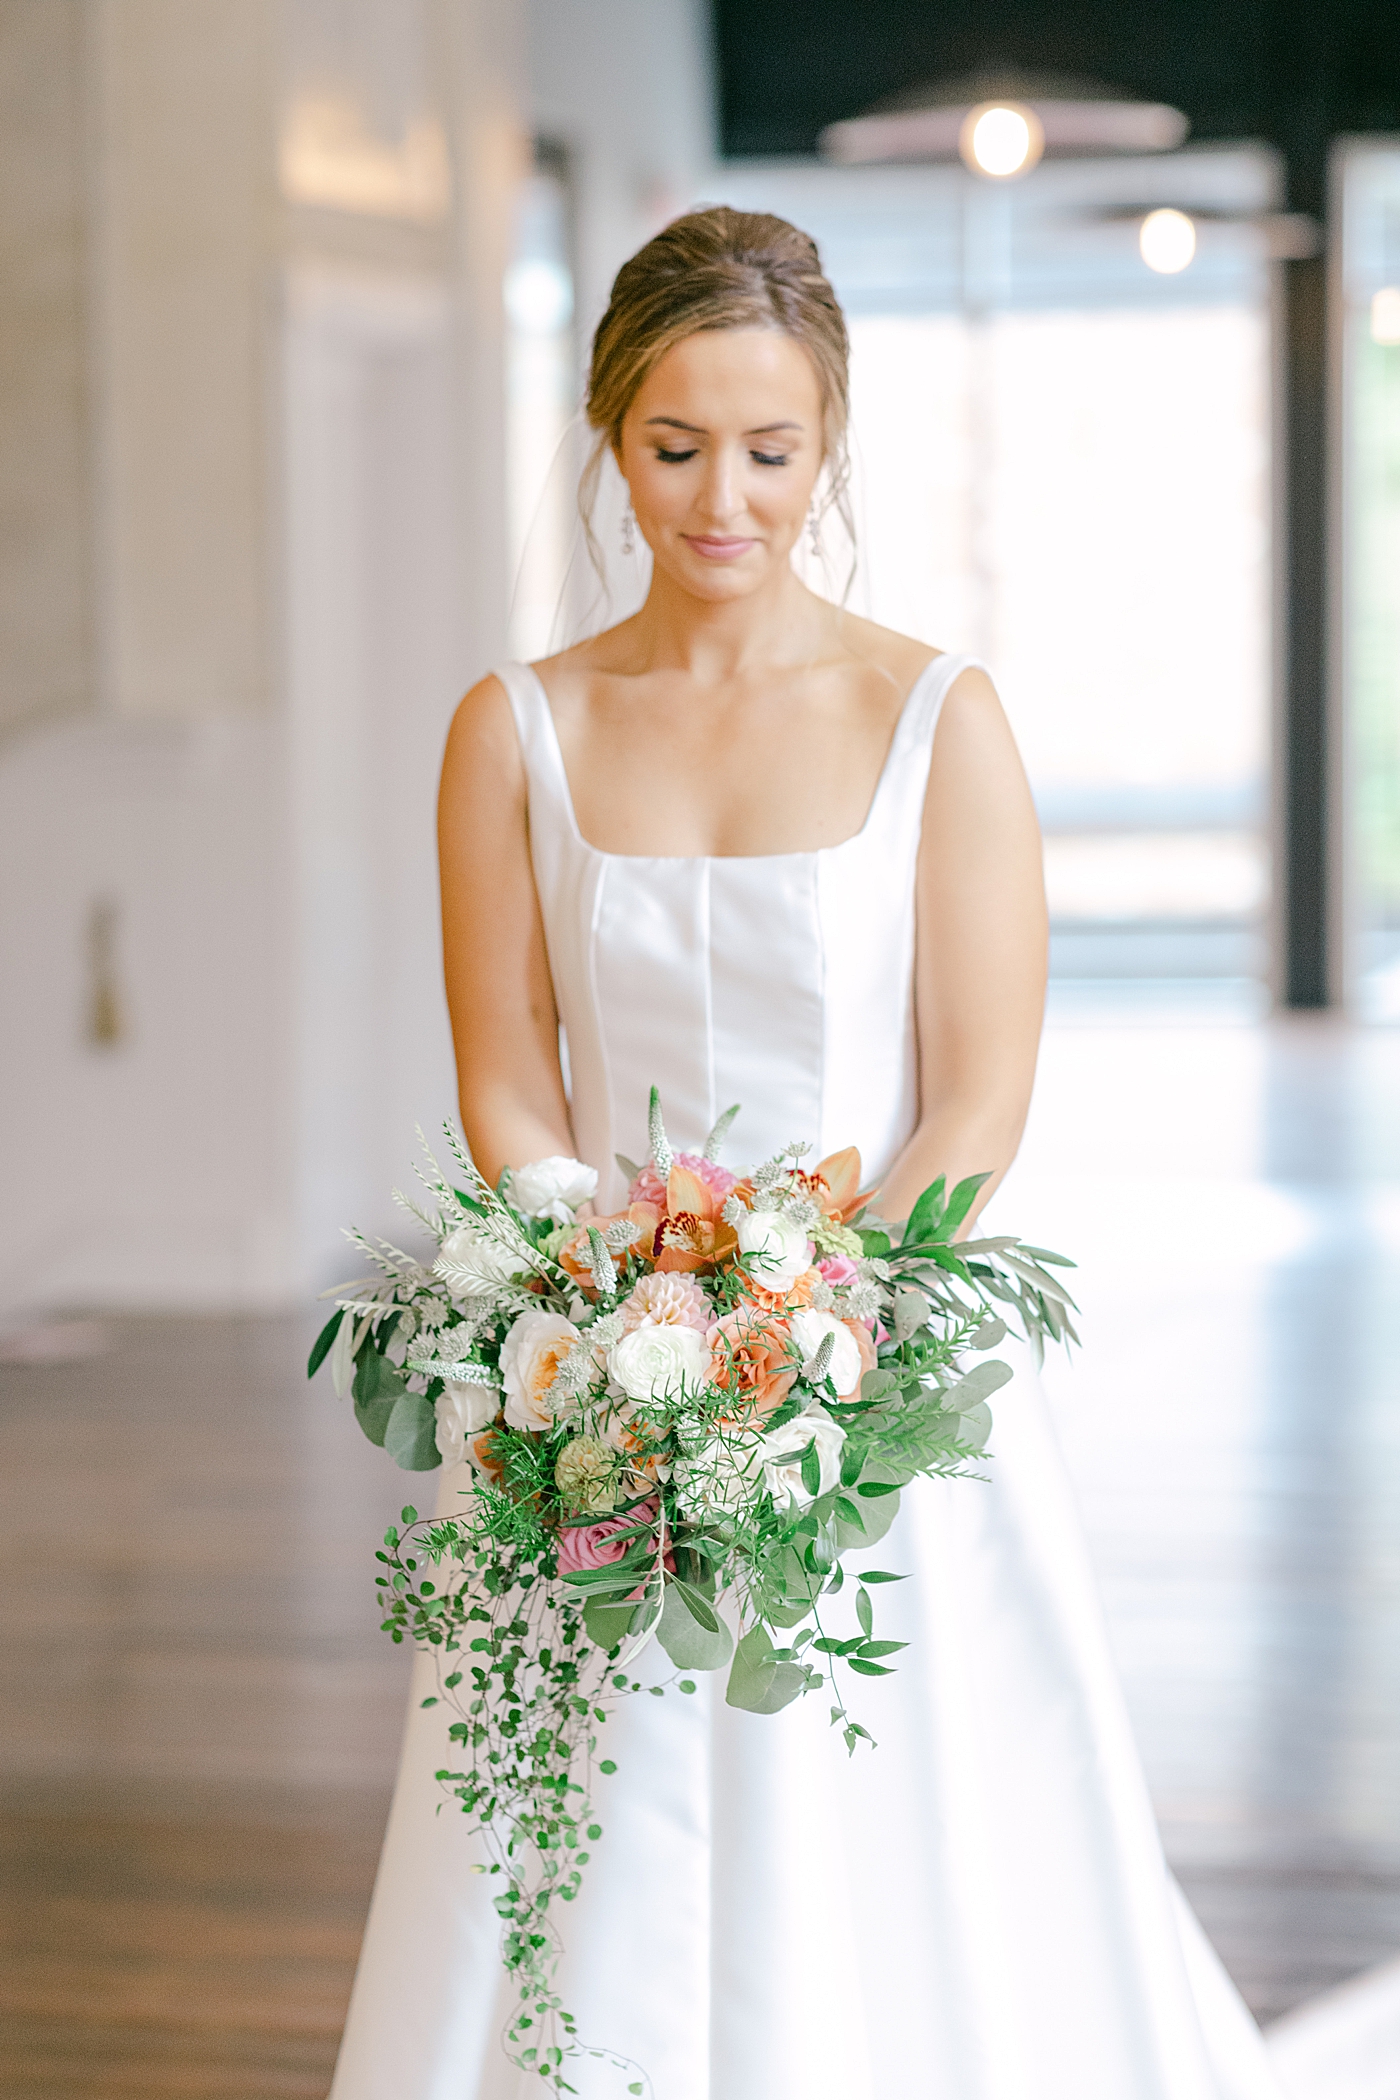 Bride holding her bouquet during portraits | Excelsior PA Wedding Photography by Hope Helmuth Photography